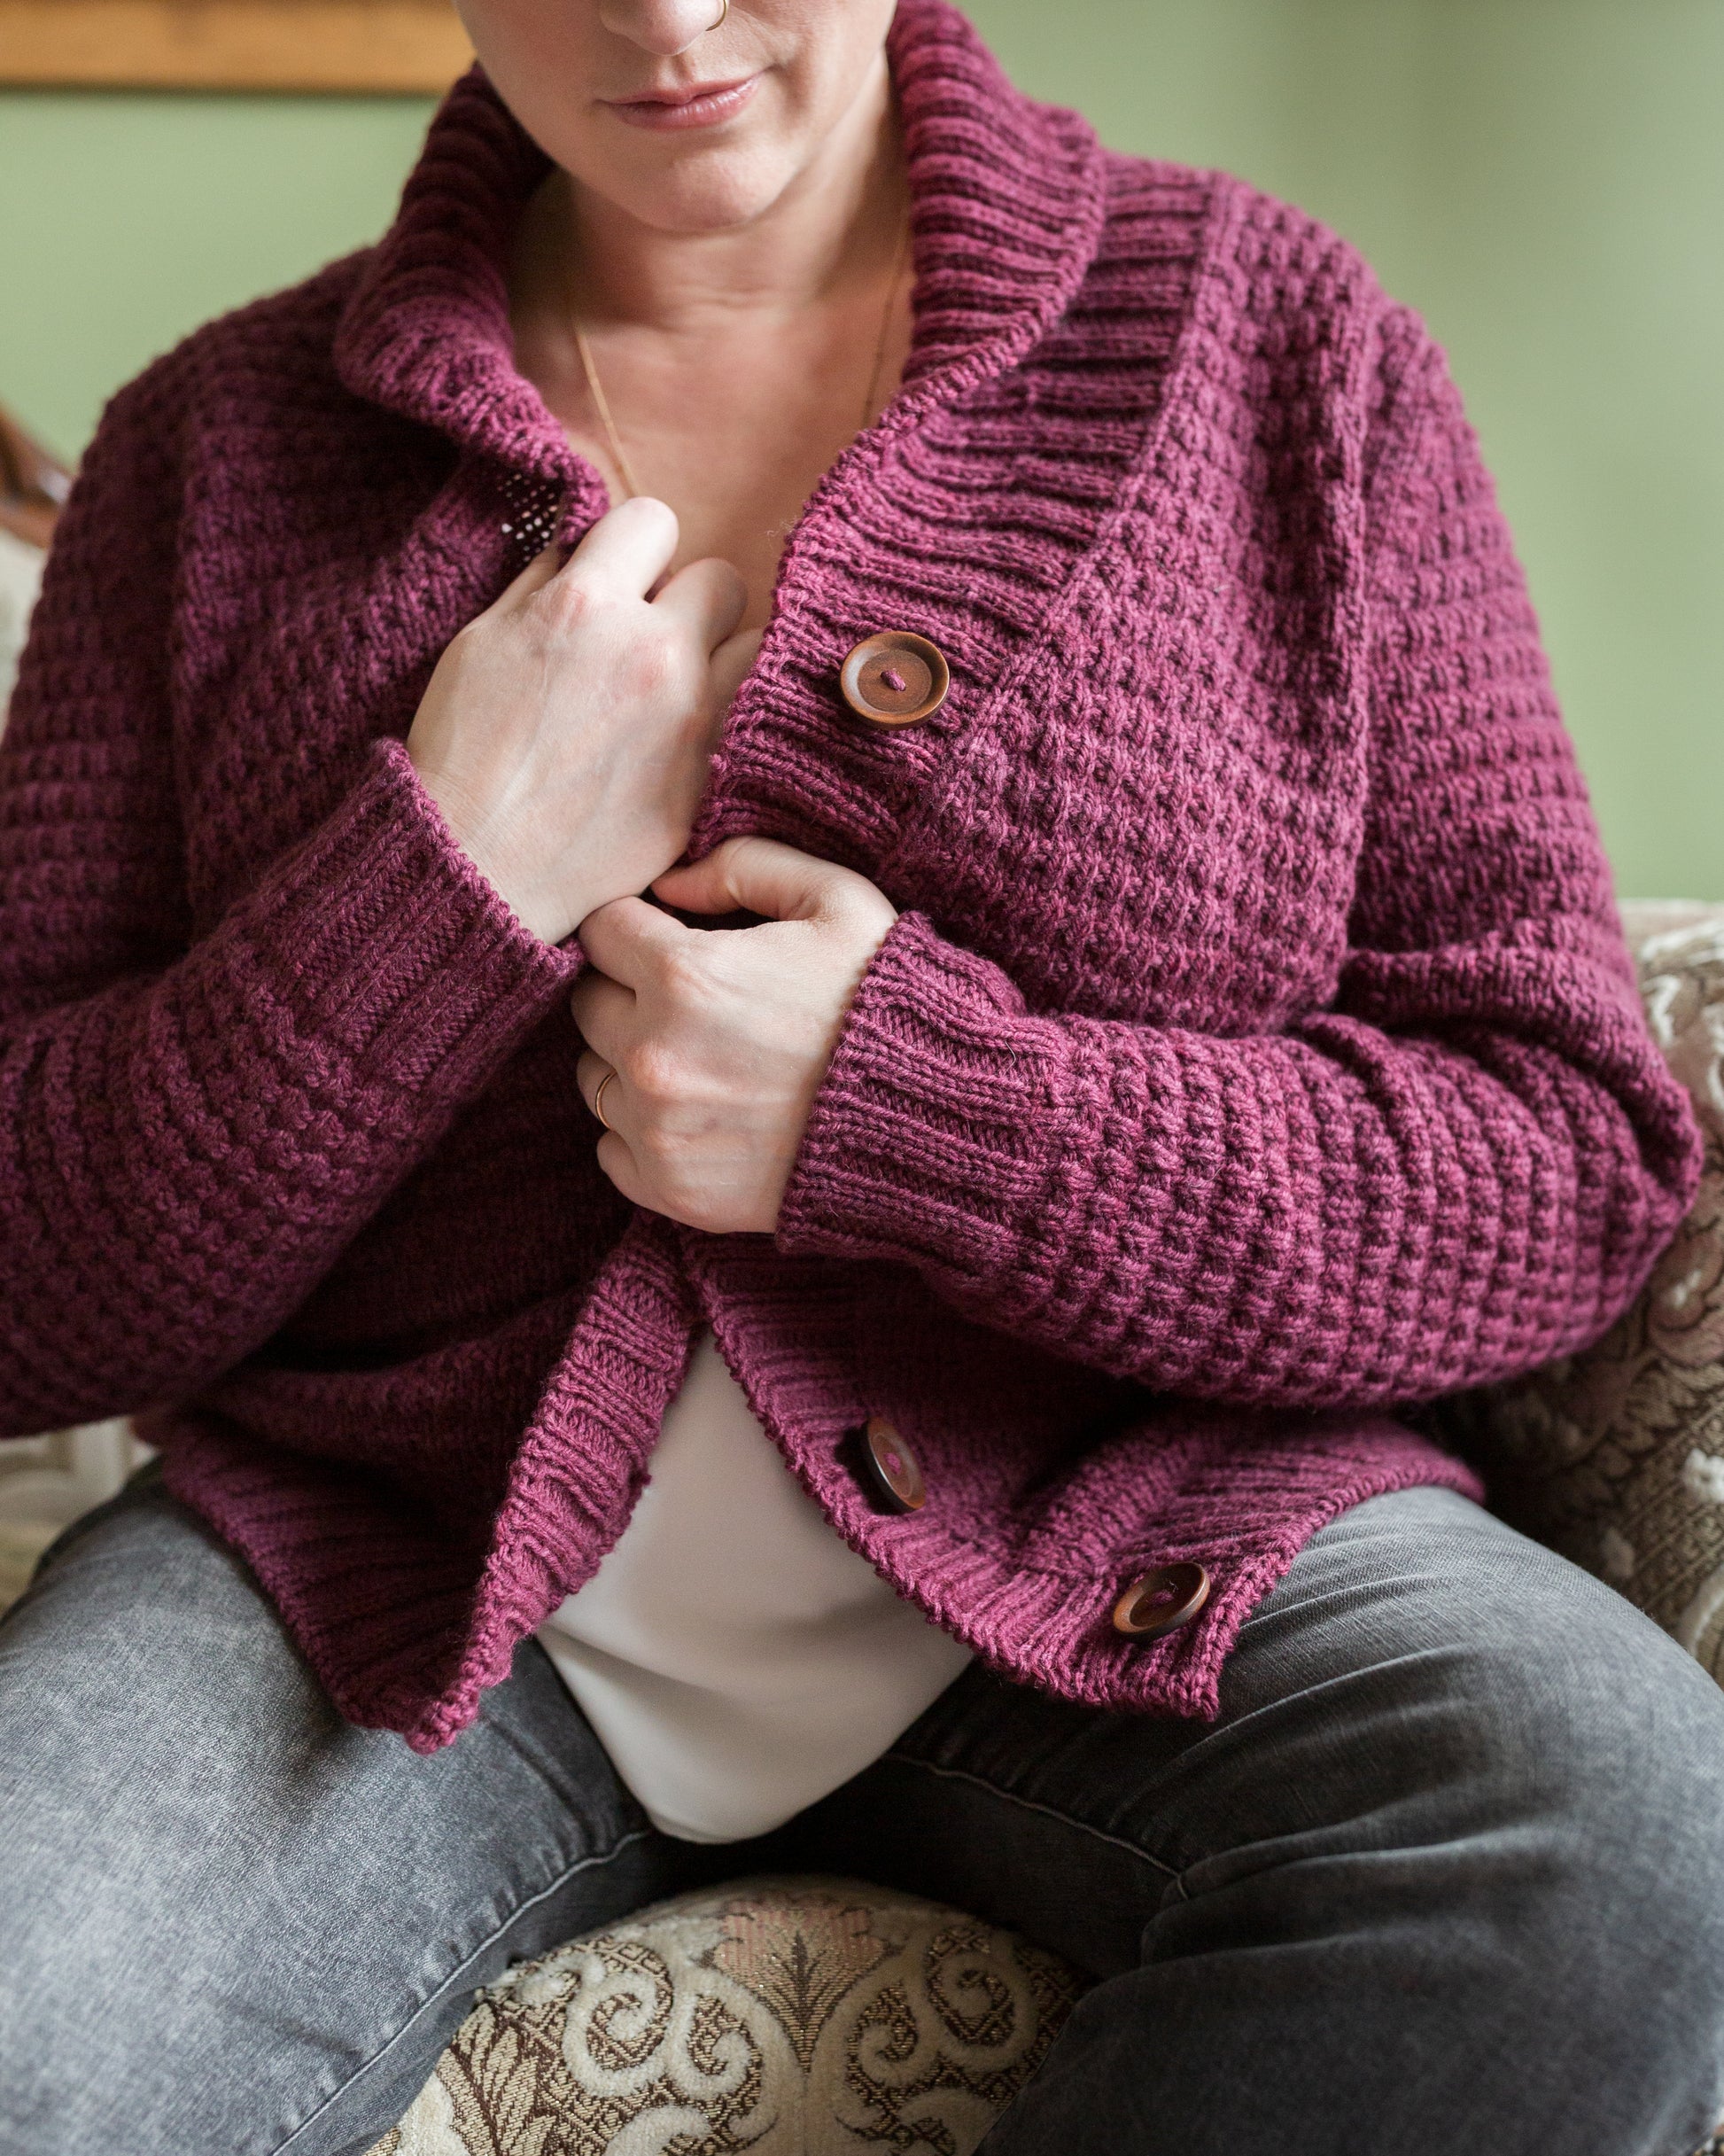 Seen close up, Jen pulls the sides of her hand knit cardigan together. The cardigan has a cowl neck and a large ribbed button band, alongside a subtle all-over stitch detail.